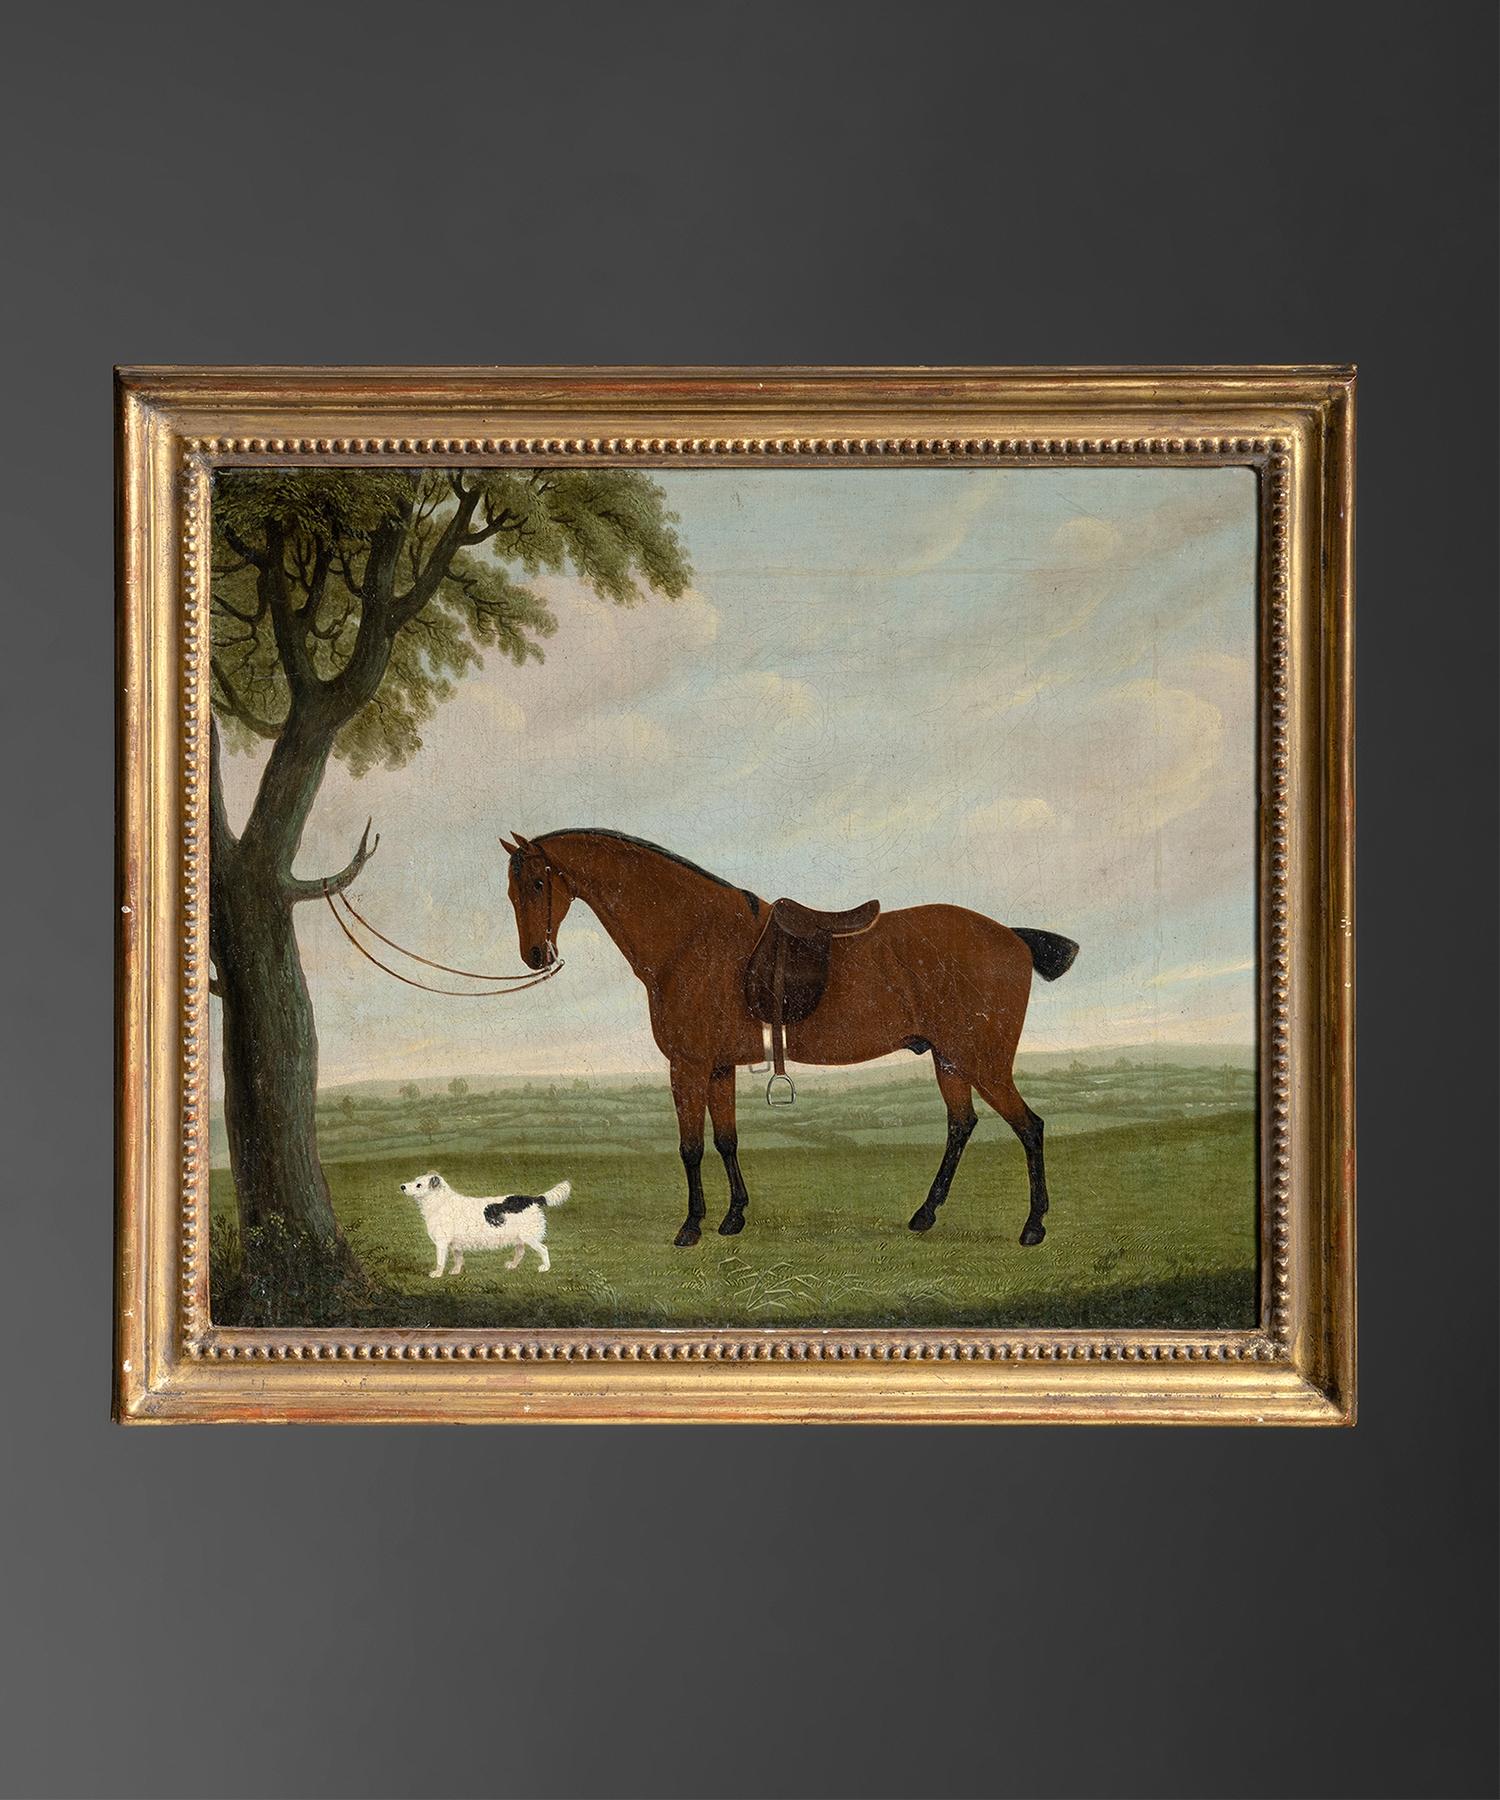 Naive Portrait of a Saddled Bay Horse

England circa 1790

Oil on canvas painting of a horse and terrier in carved and gilded frame.

Measures: 24